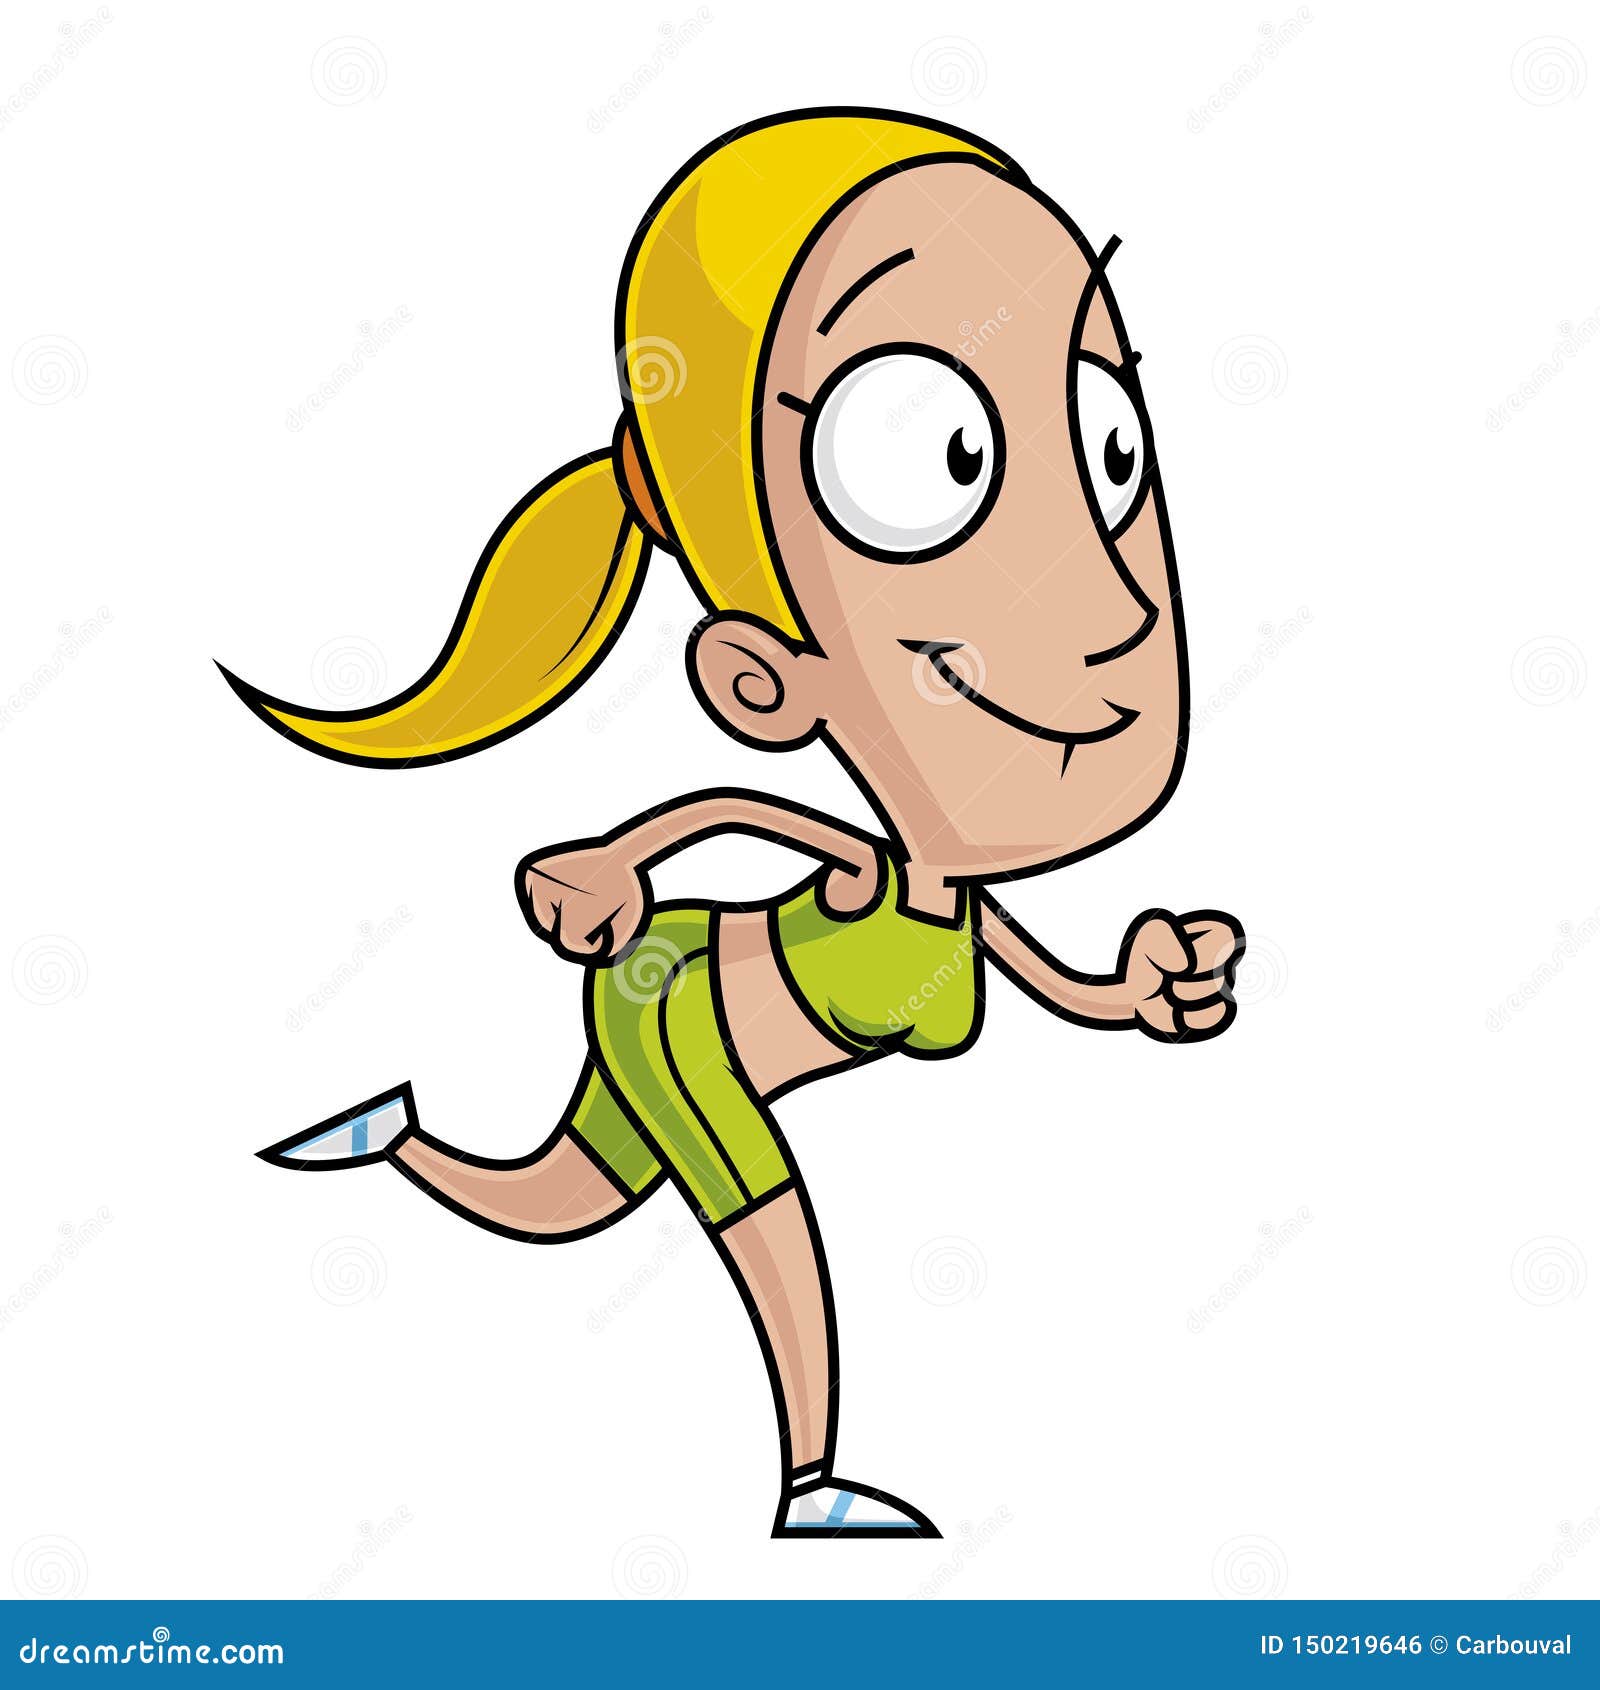 Cartoon Illustration Of A A Woman Runner Stock Vector - Illustration of  athlete, isolated: 150219646